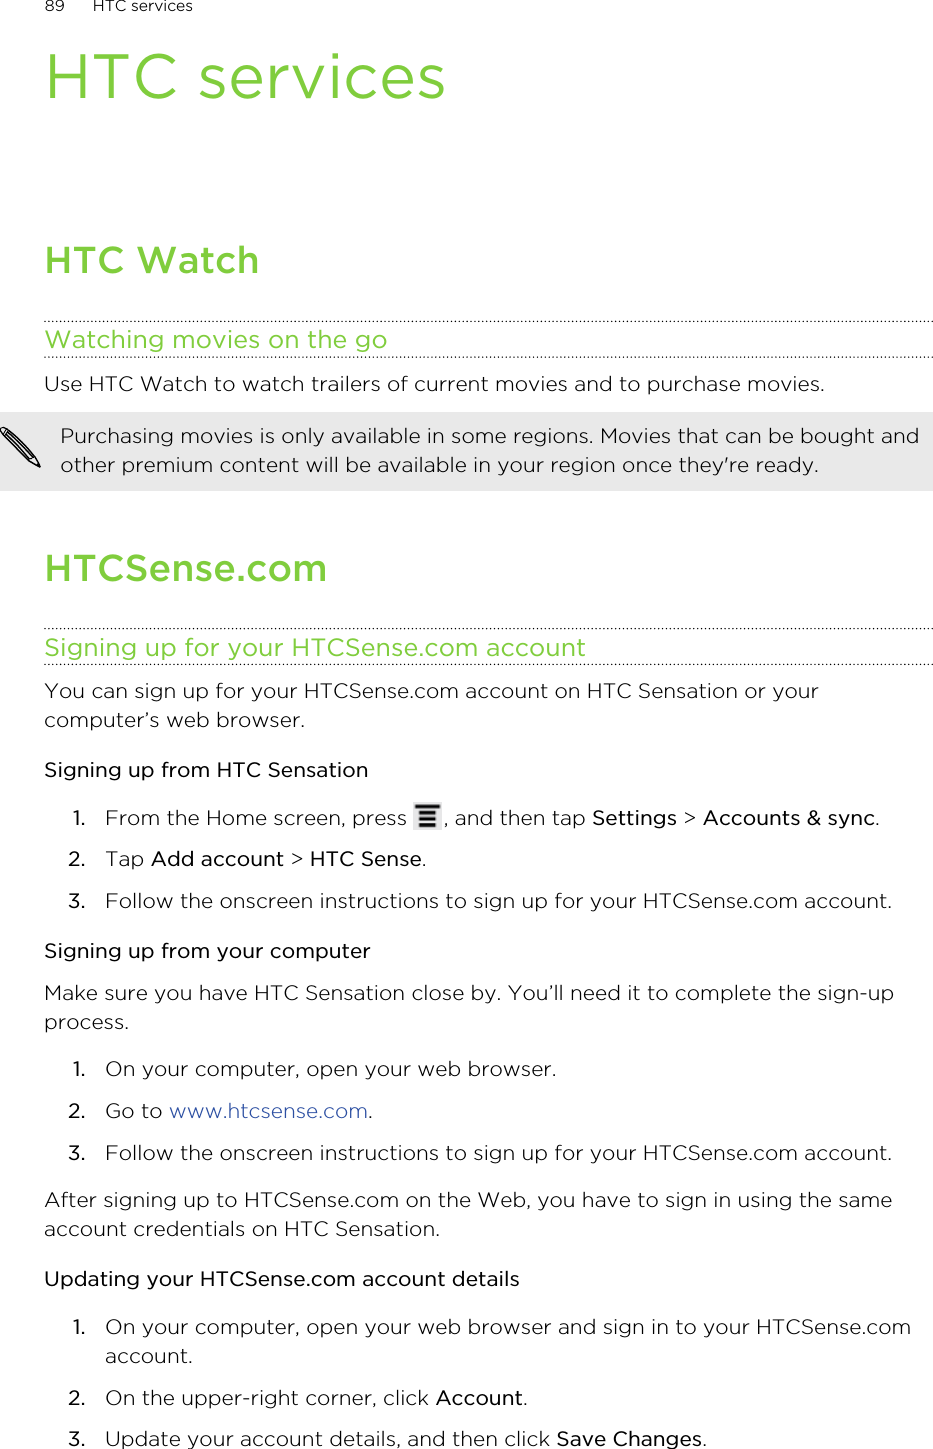 HTC servicesHTC WatchWatching movies on the goUse HTC Watch to watch trailers of current movies and to purchase movies.Purchasing movies is only available in some regions. Movies that can be bought andother premium content will be available in your region once they&apos;re ready.HTCSense.comSigning up for your HTCSense.com accountYou can sign up for your HTCSense.com account on HTC Sensation or yourcomputer’s web browser.Signing up from HTC Sensation1. From the Home screen, press  , and then tap Settings &gt; Accounts &amp; sync.2. Tap Add account &gt; HTC Sense.3. Follow the onscreen instructions to sign up for your HTCSense.com account.Signing up from your computerMake sure you have HTC Sensation close by. You’ll need it to complete the sign-upprocess.1. On your computer, open your web browser.2. Go to www.htcsense.com.3. Follow the onscreen instructions to sign up for your HTCSense.com account.After signing up to HTCSense.com on the Web, you have to sign in using the sameaccount credentials on HTC Sensation.Updating your HTCSense.com account details1. On your computer, open your web browser and sign in to your HTCSense.comaccount.2. On the upper-right corner, click Account.3. Update your account details, and then click Save Changes.89 HTC services